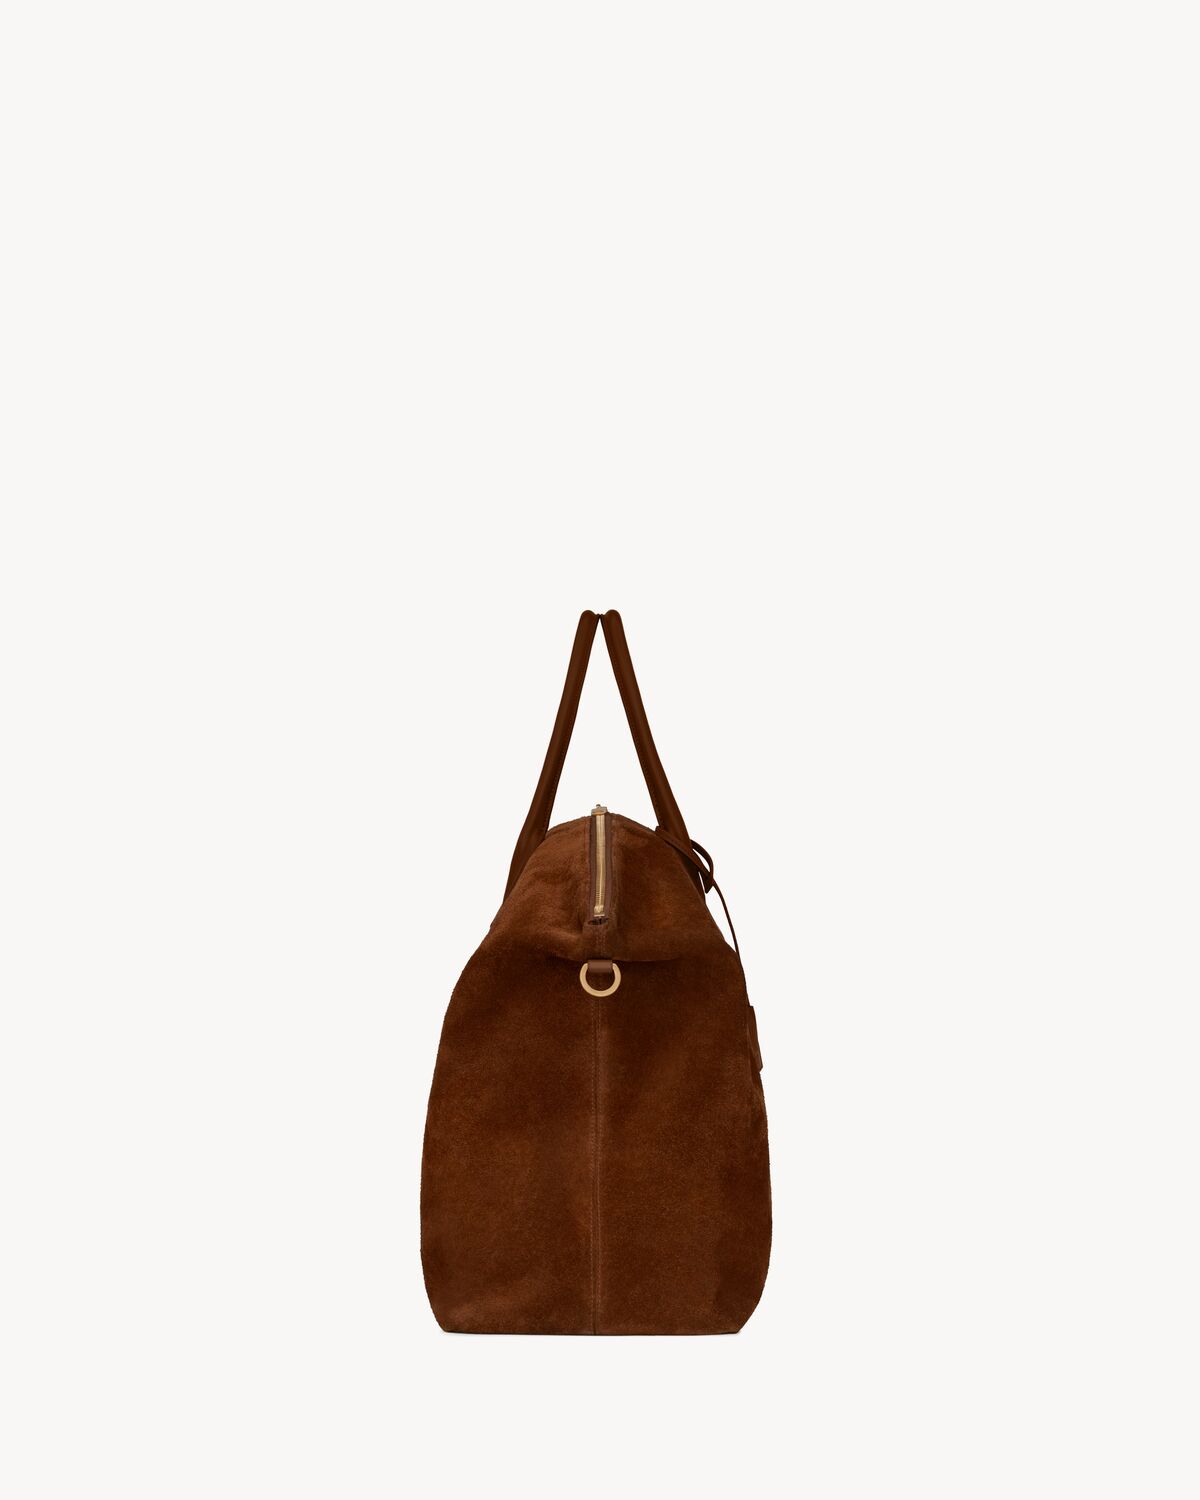 GIANT BOWLING bag in suede